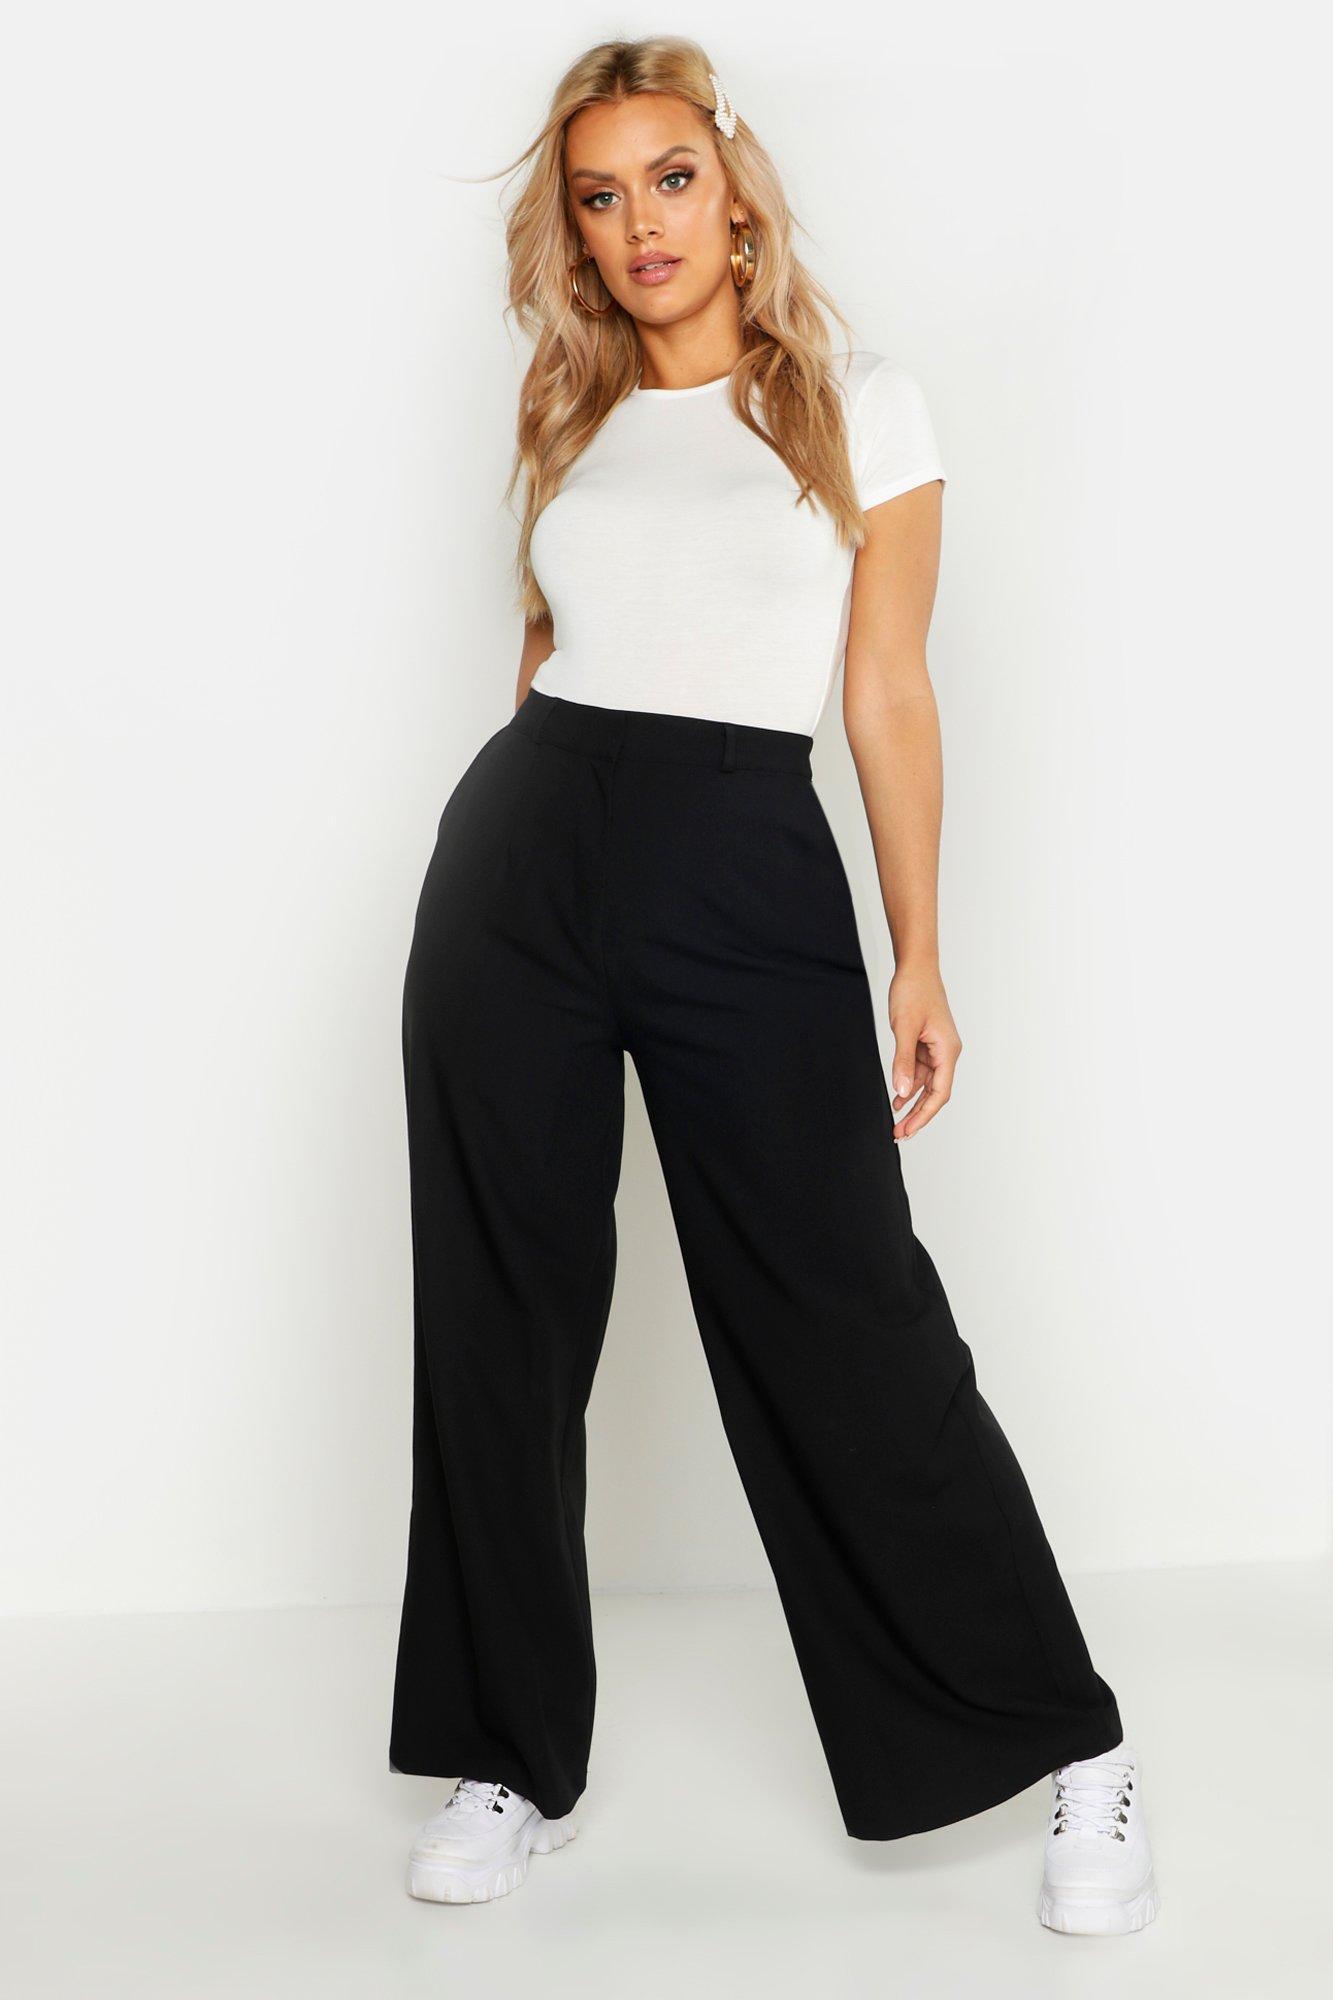 Boohoo Plus Tailored High Waisted Wide Leg Pants in Black